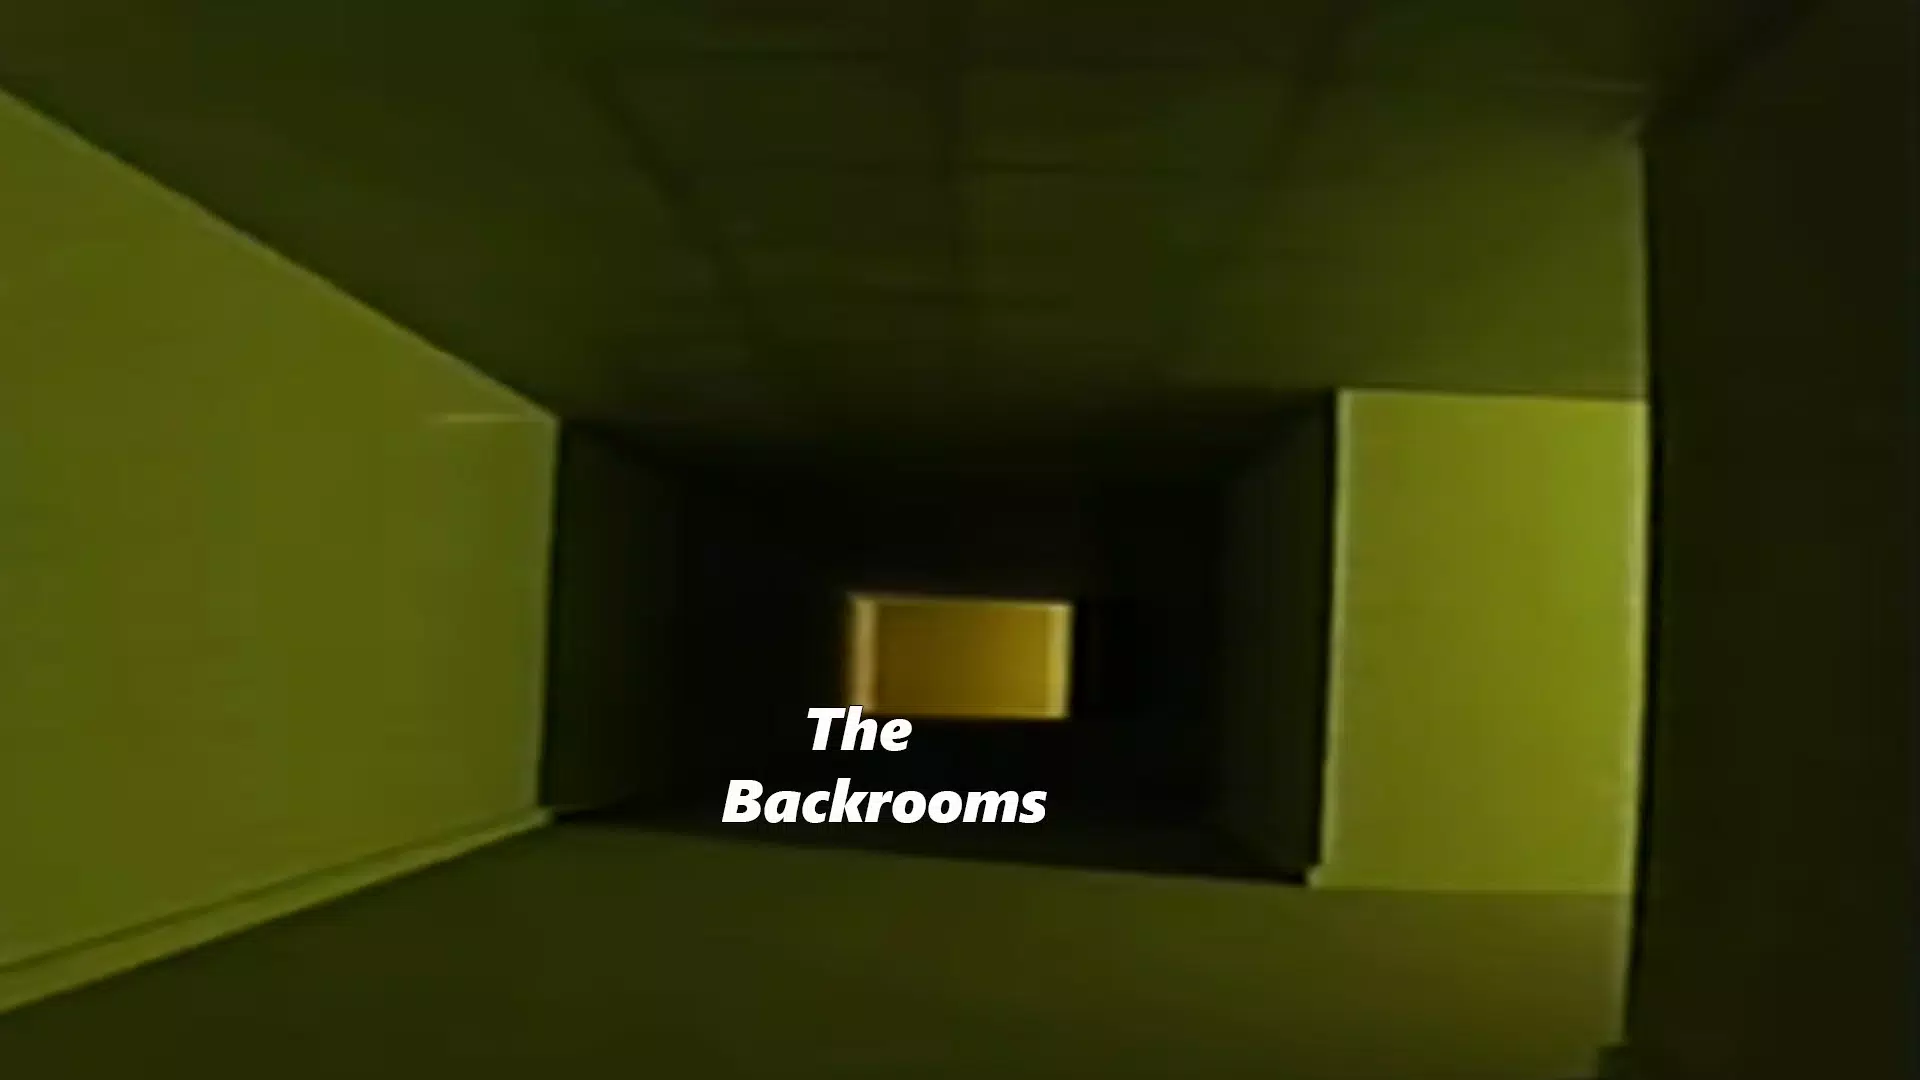 Top 8 Backrooms Games For Android, The Backrooms Horror Games